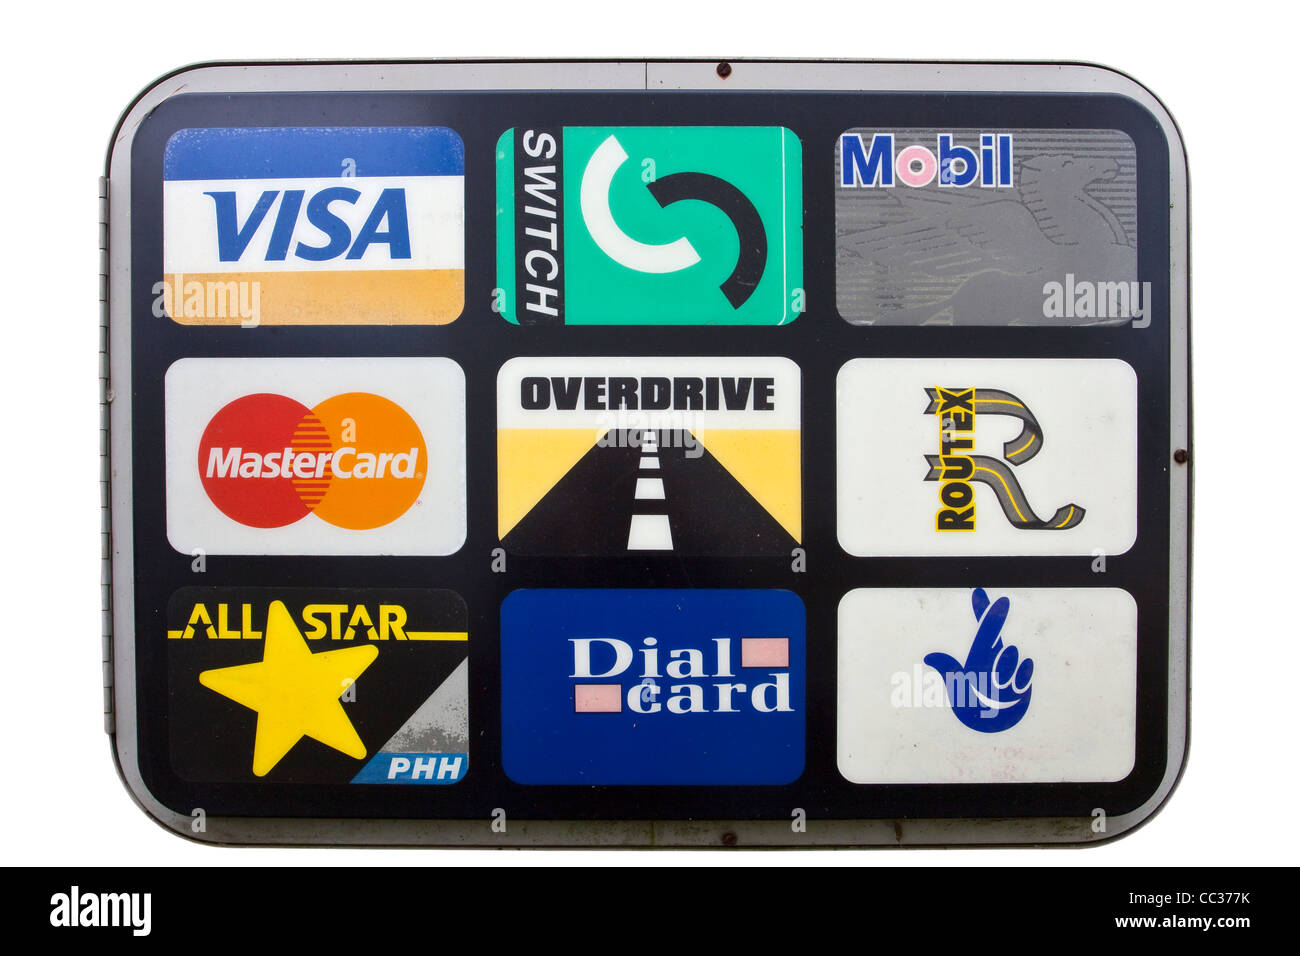 Old Garage Credit Card Sign visa switch mobil mastercard overdrive routex  all star dial card lottery Stock Photo - Alamy